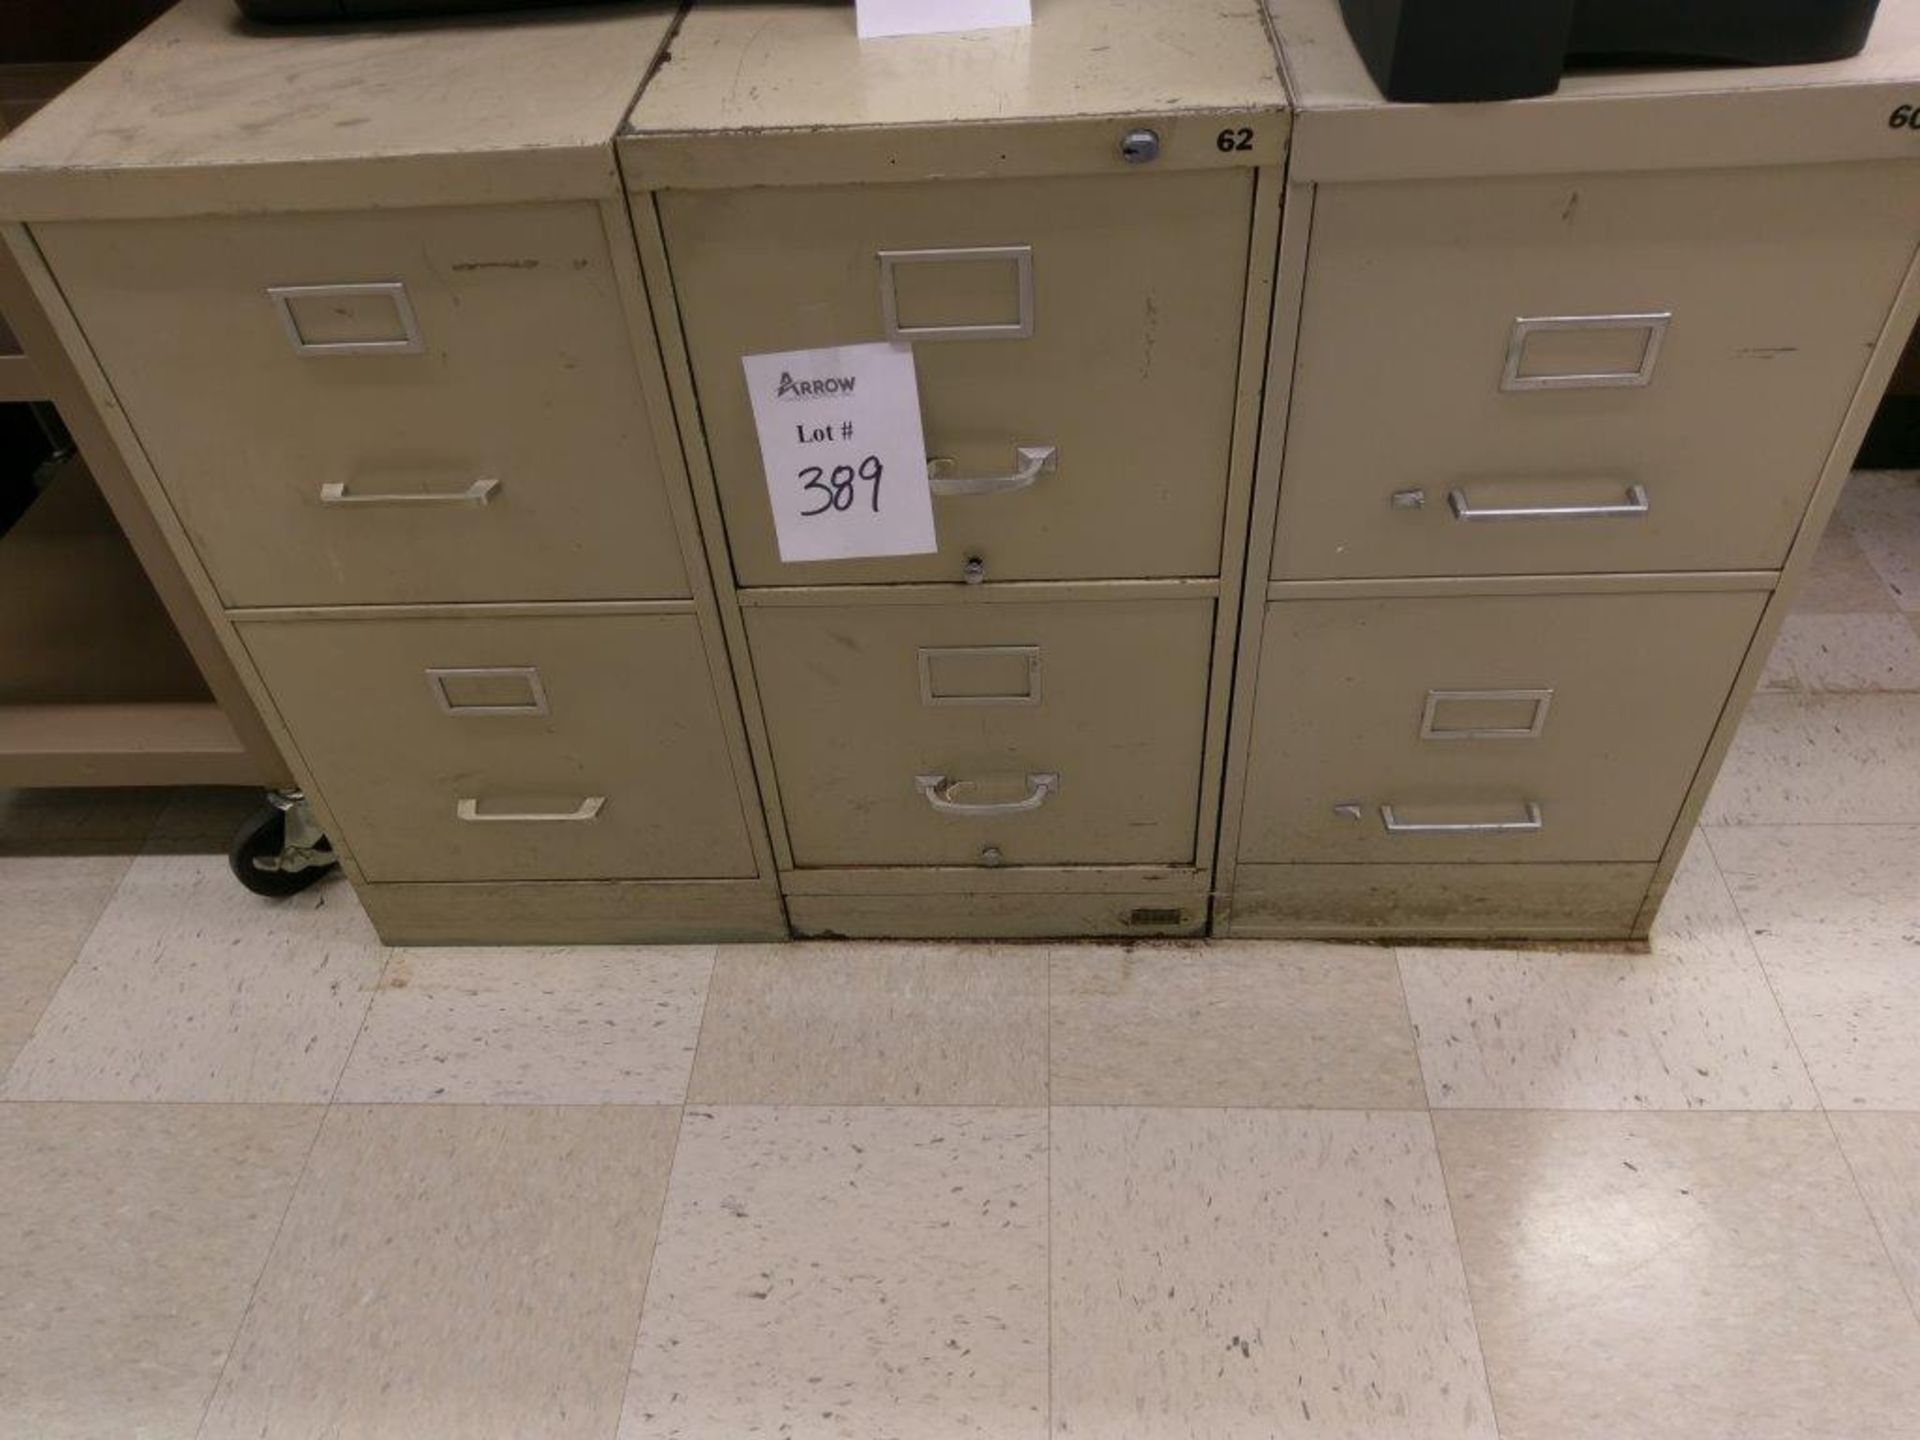 (3) 2-Drawer File Cabinets - ( Contents not Included ) - Note: REMOVAL DATE'S Sep 19th - 21st